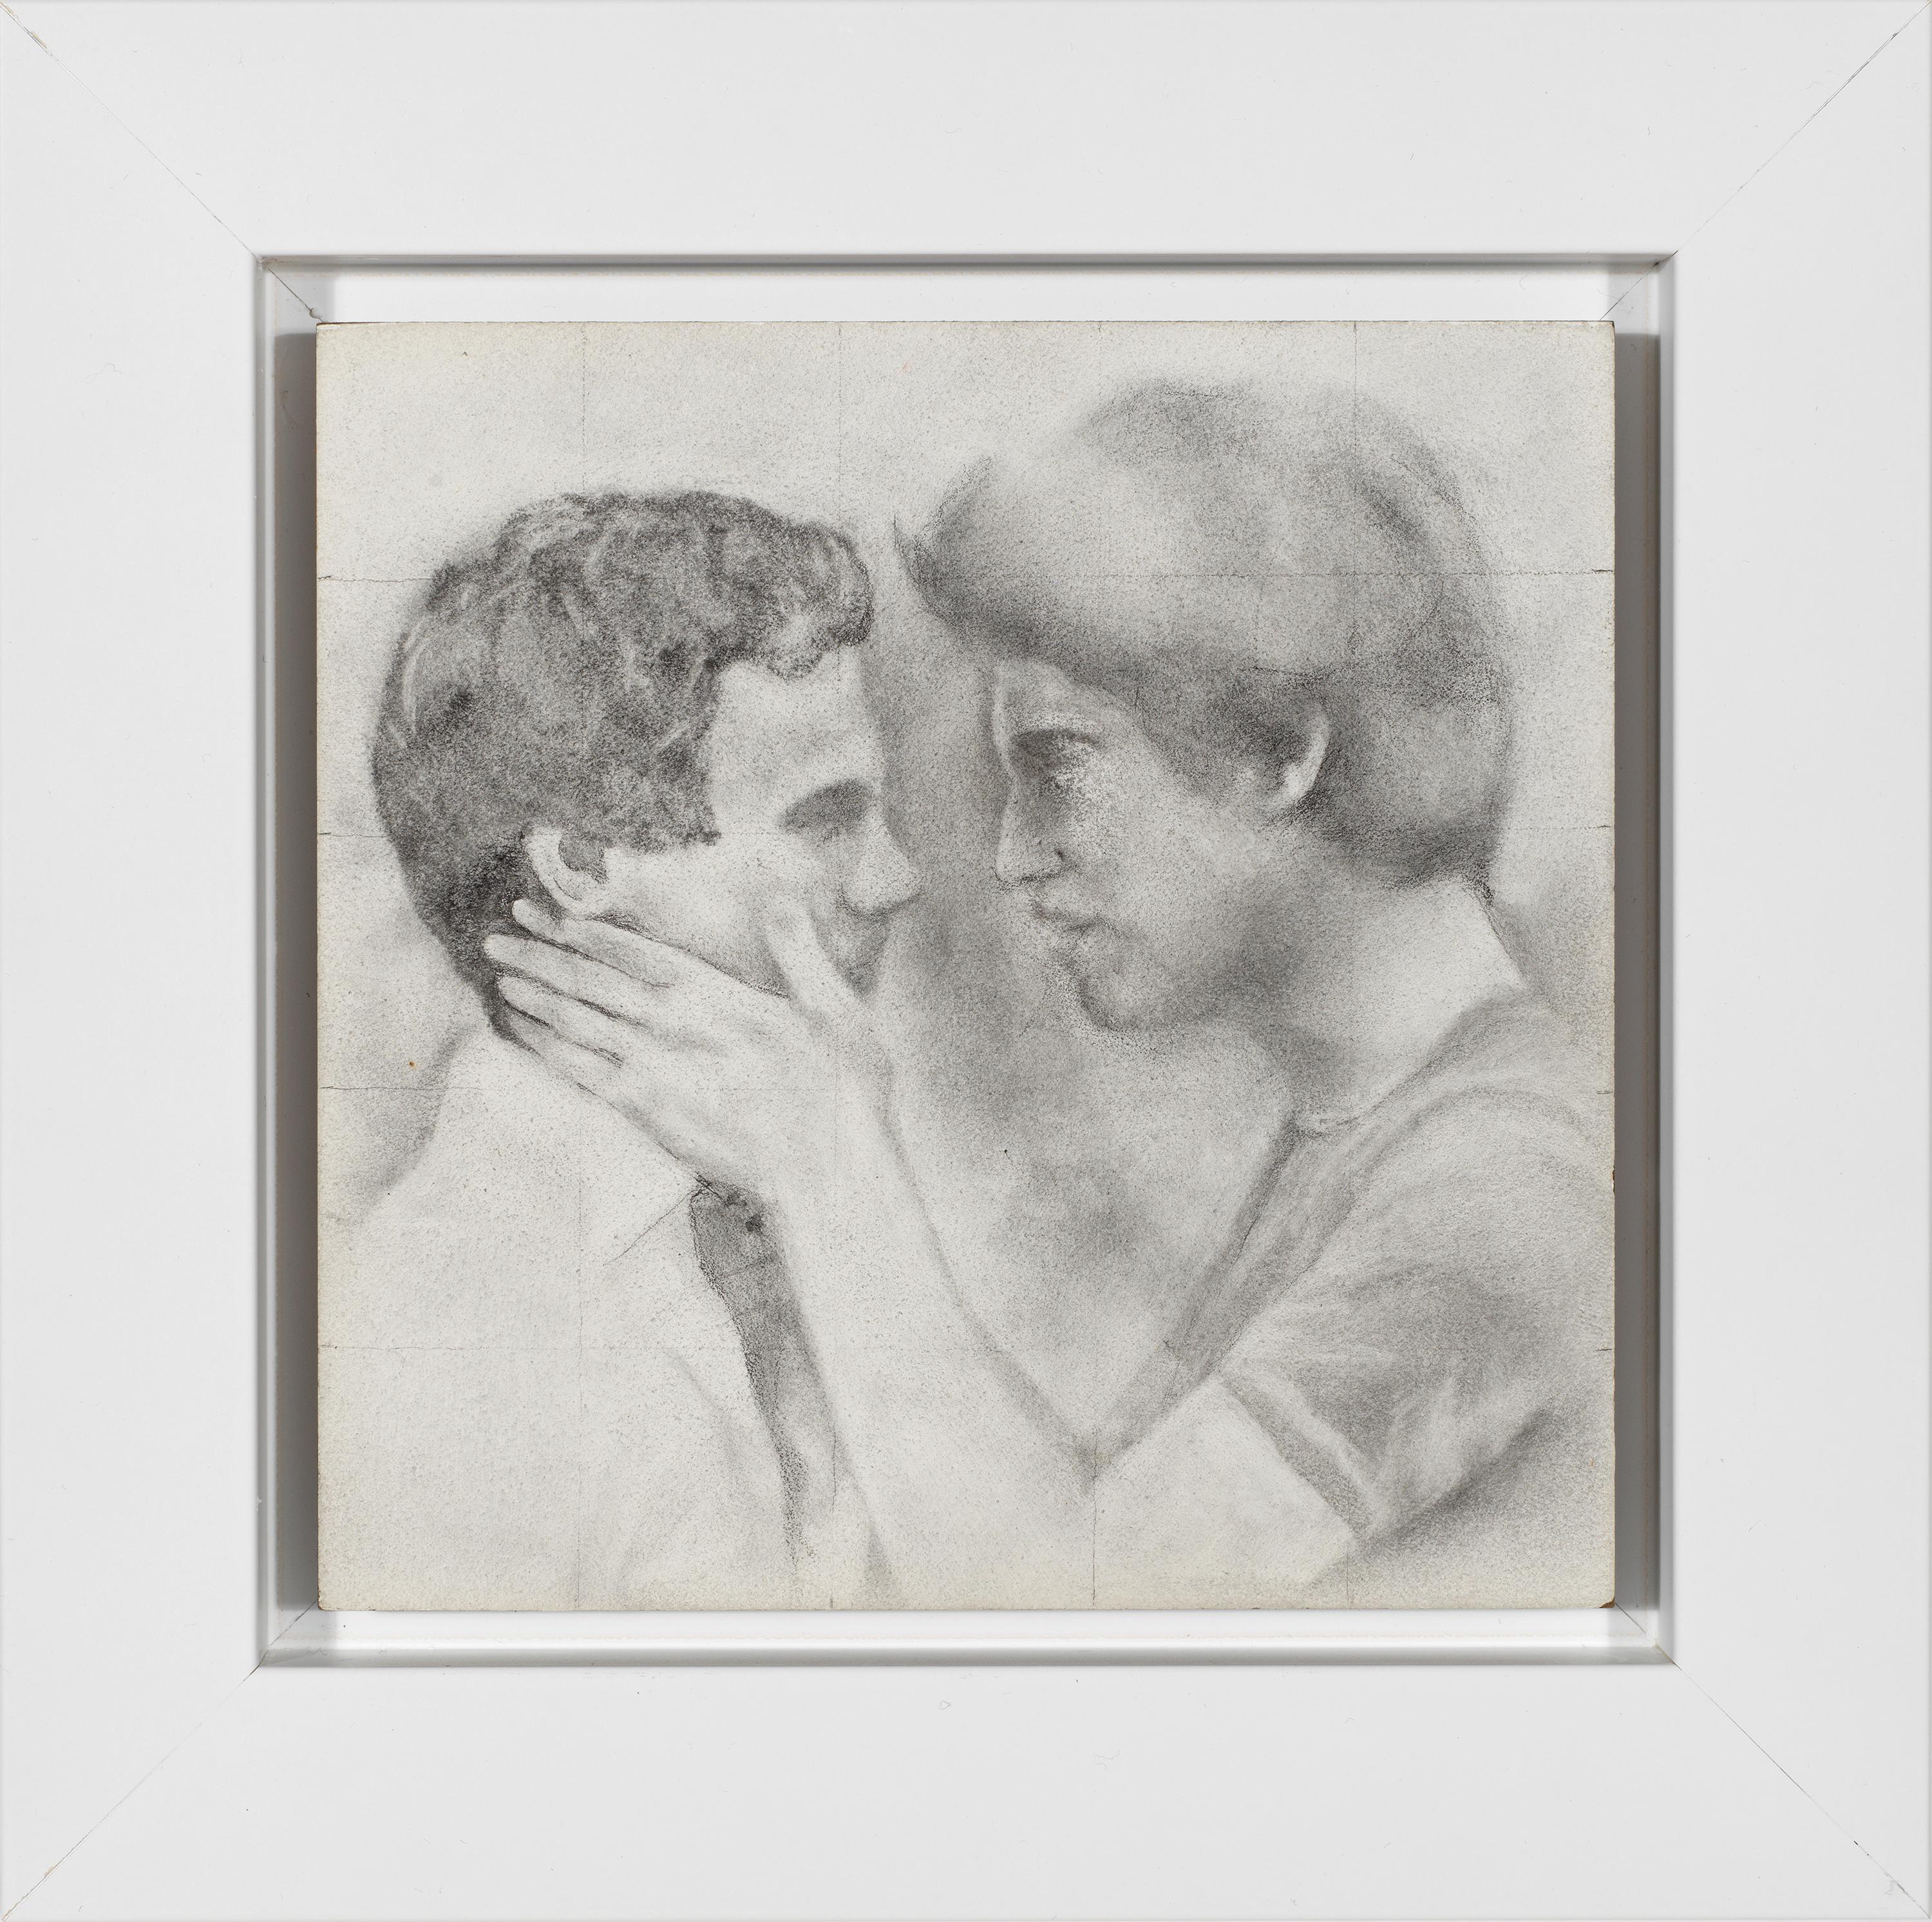 Held - Male Figures Embracing Each Other, Original Graphite on Panel Drawing - Art by Rick Sindt